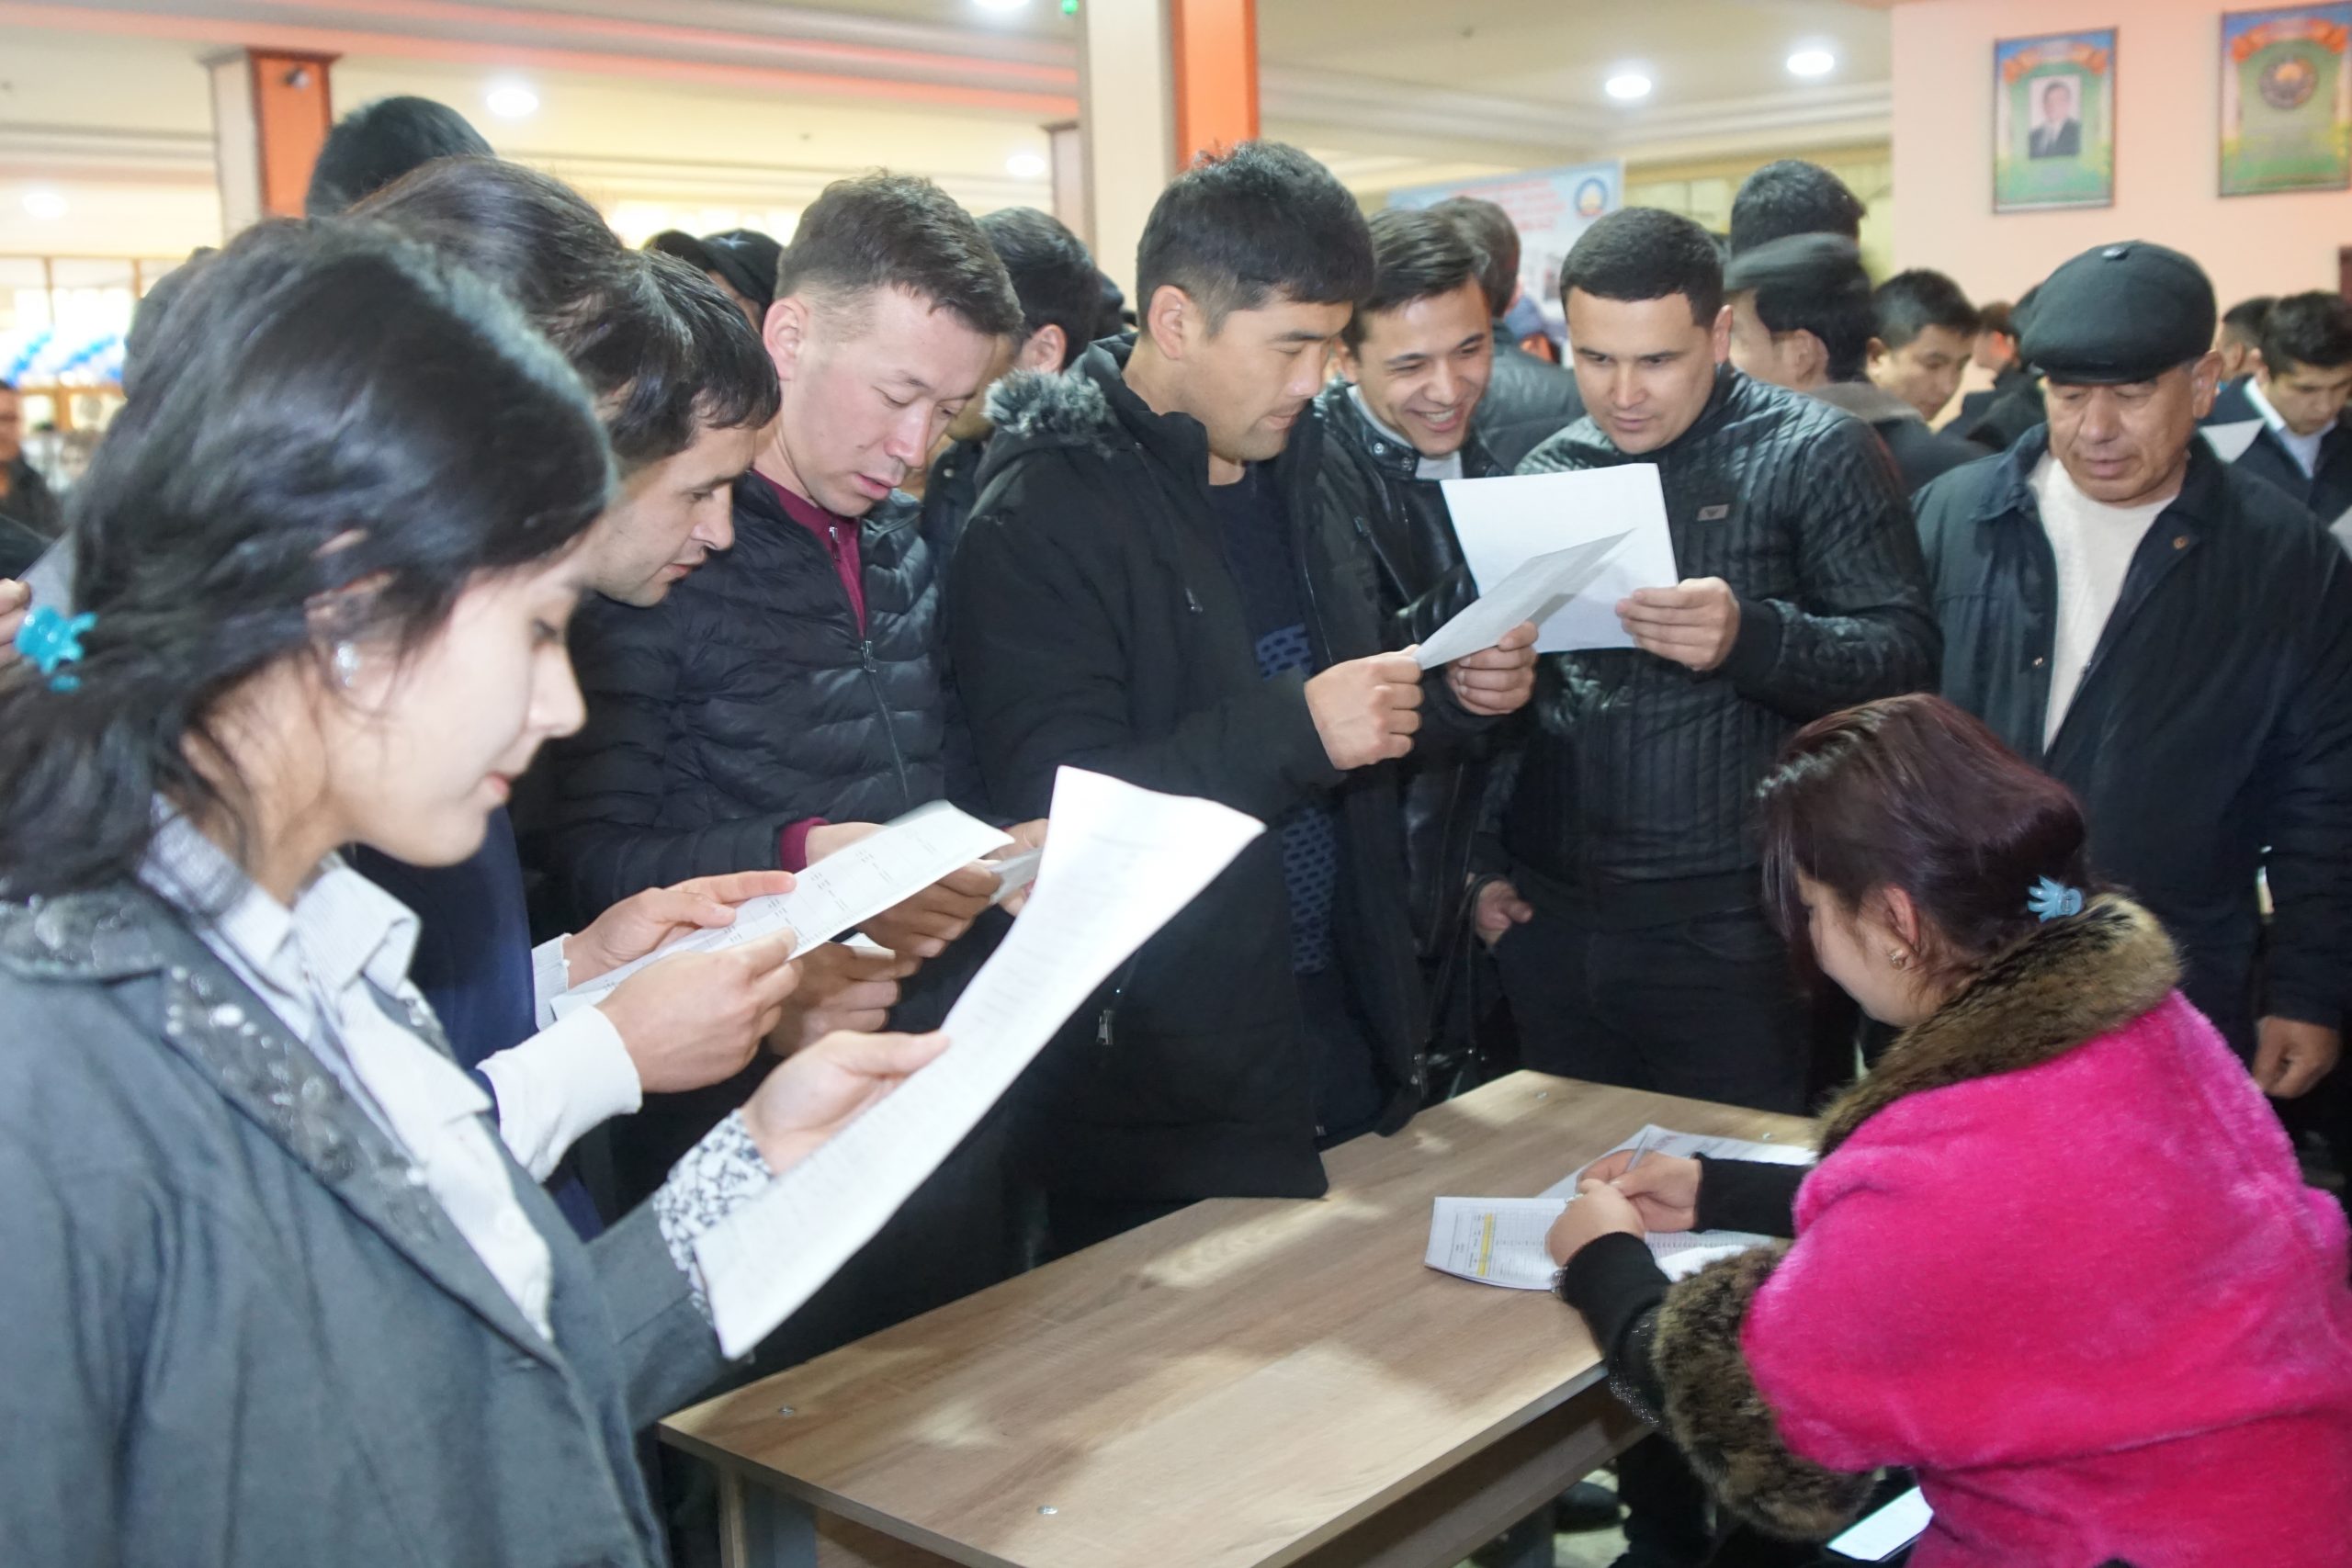 43 STUDENTS WERE EMPLOYED AT THE JOB FAIR